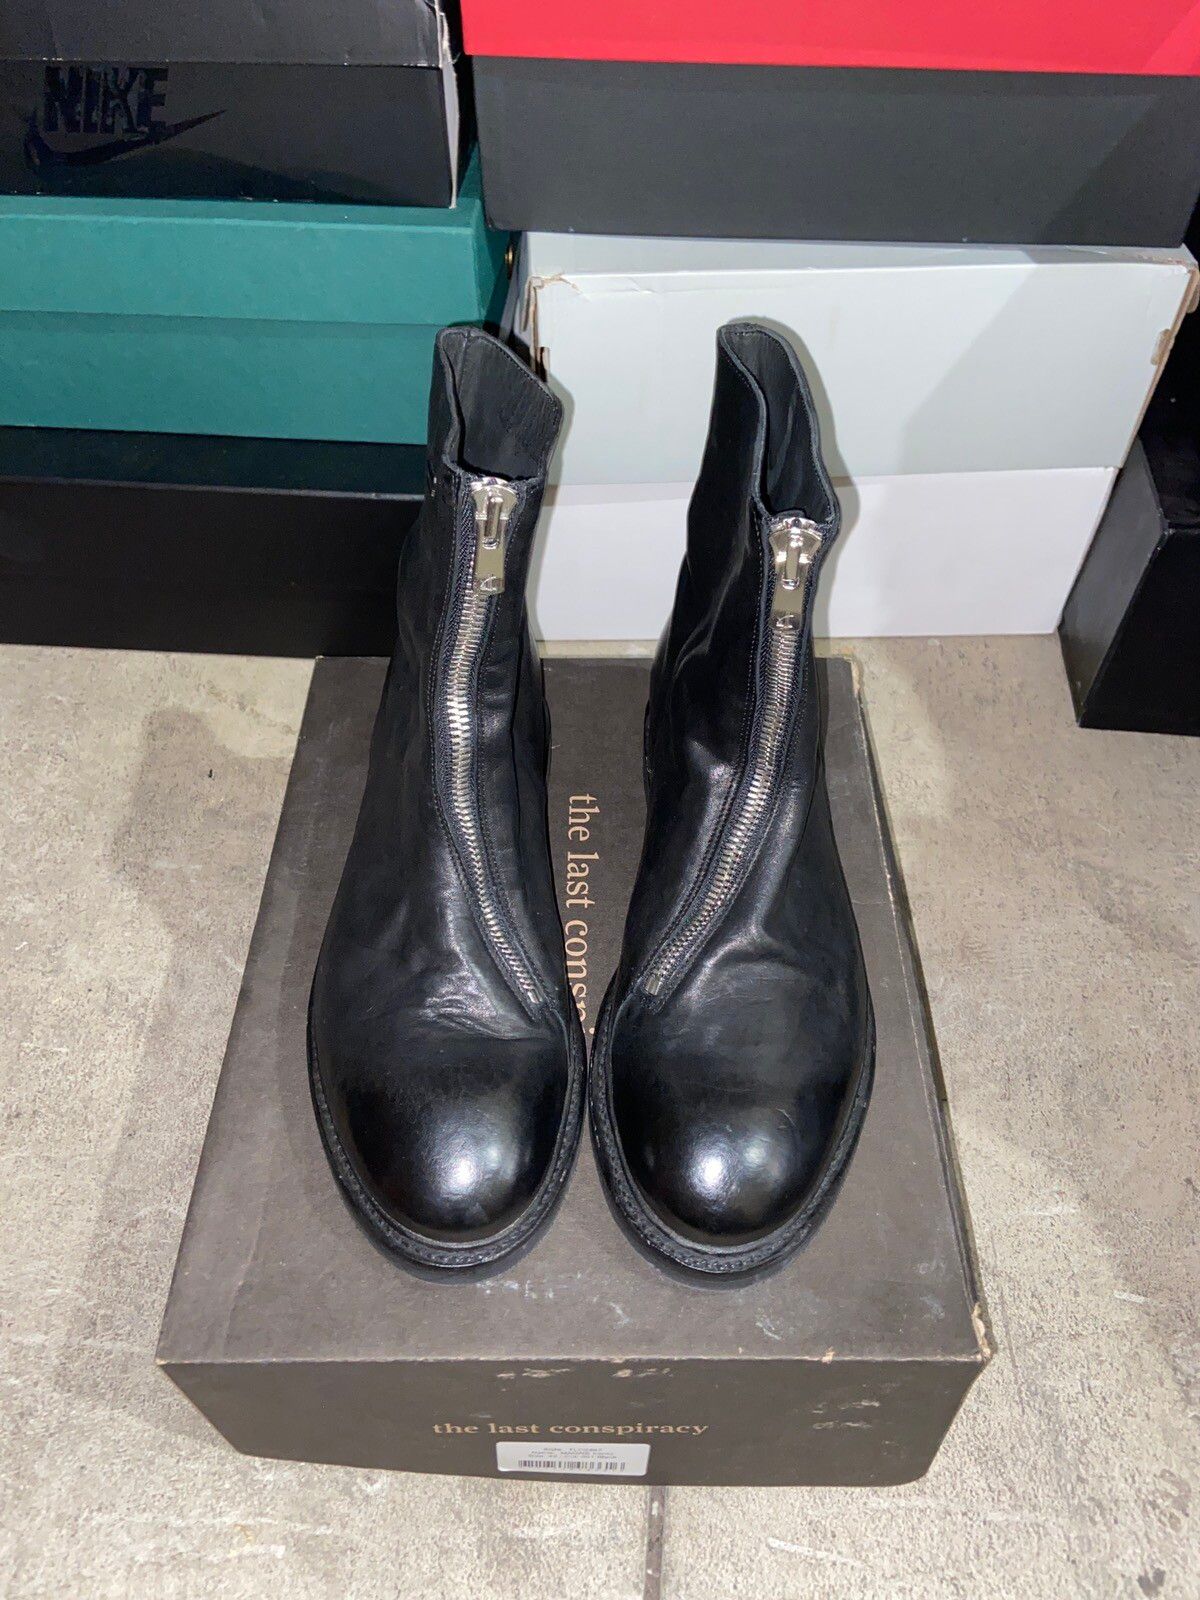 The Last Conspiracy The Last Conspiracy Magne Trento Boots size 42 NWT ...